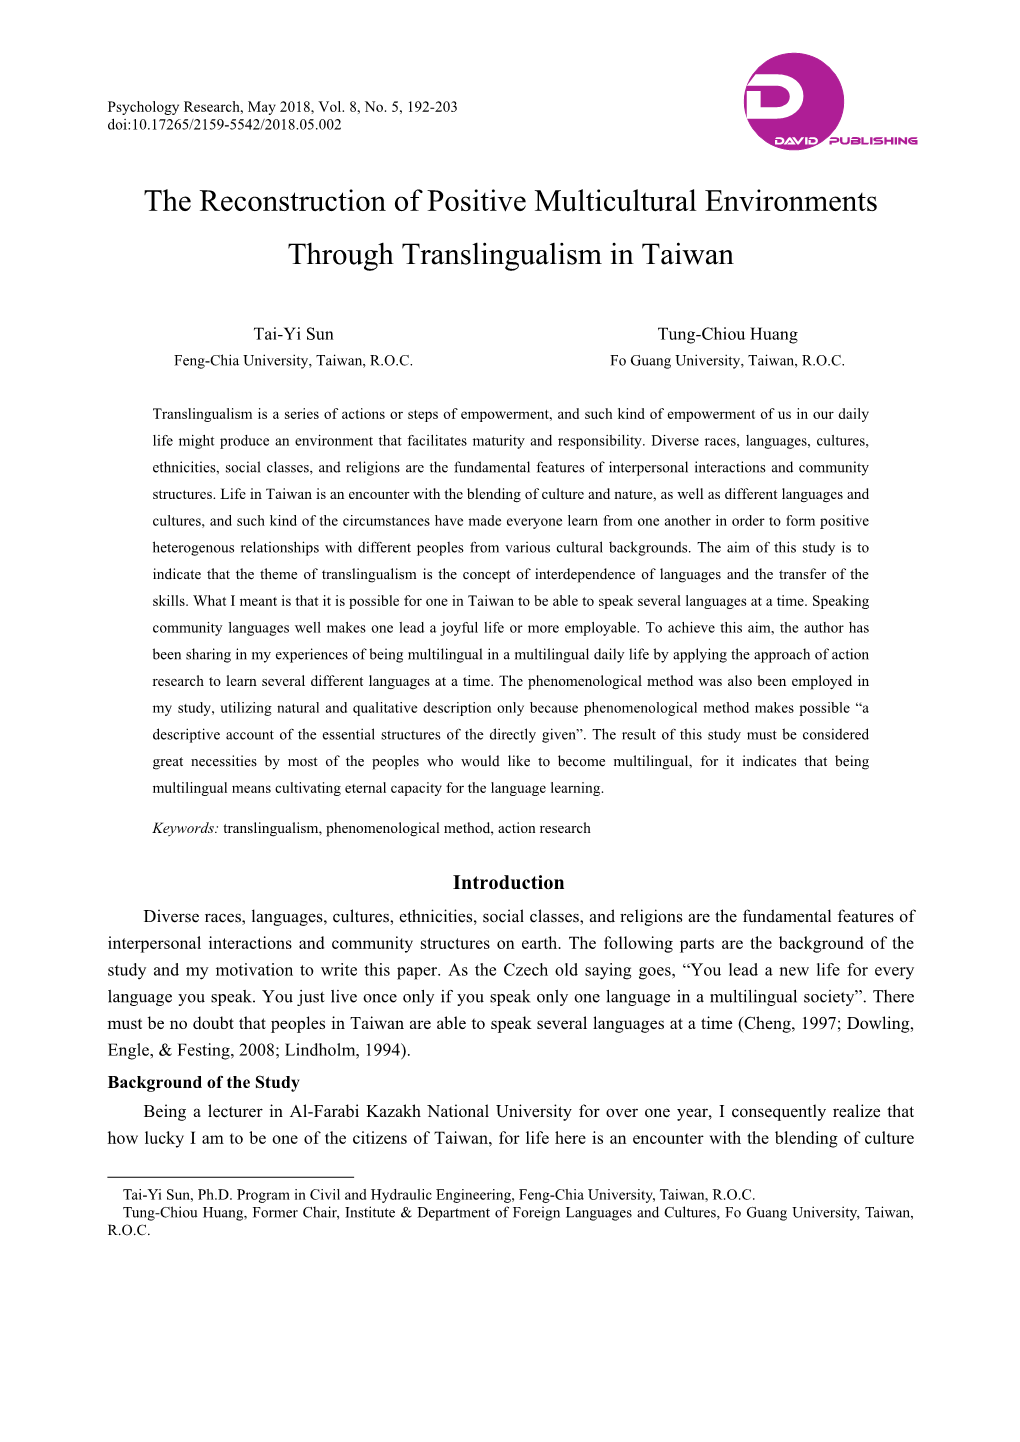 The Reconstruction of Positive Multicultural Environments Through Translingualism in Taiwan